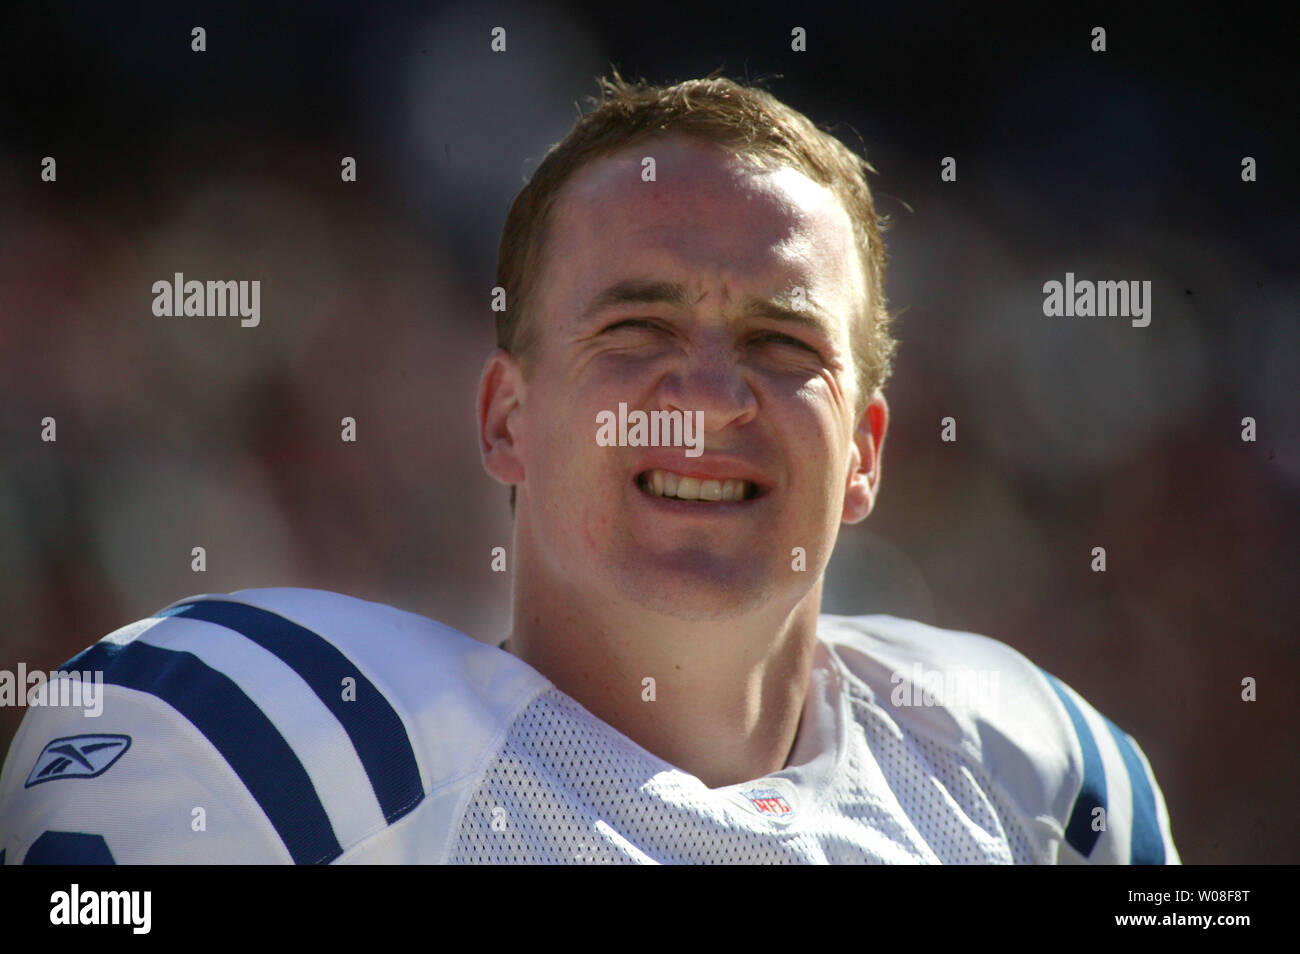 Indianapolis Colts QB Peyton Manning squints in the sun as he watches the scoreboard during play against the San Francisco 49ers at Monster Park in San Francisco on October 9, 2005.  (UPI Photo/Terry Schmitt) Stock Photo